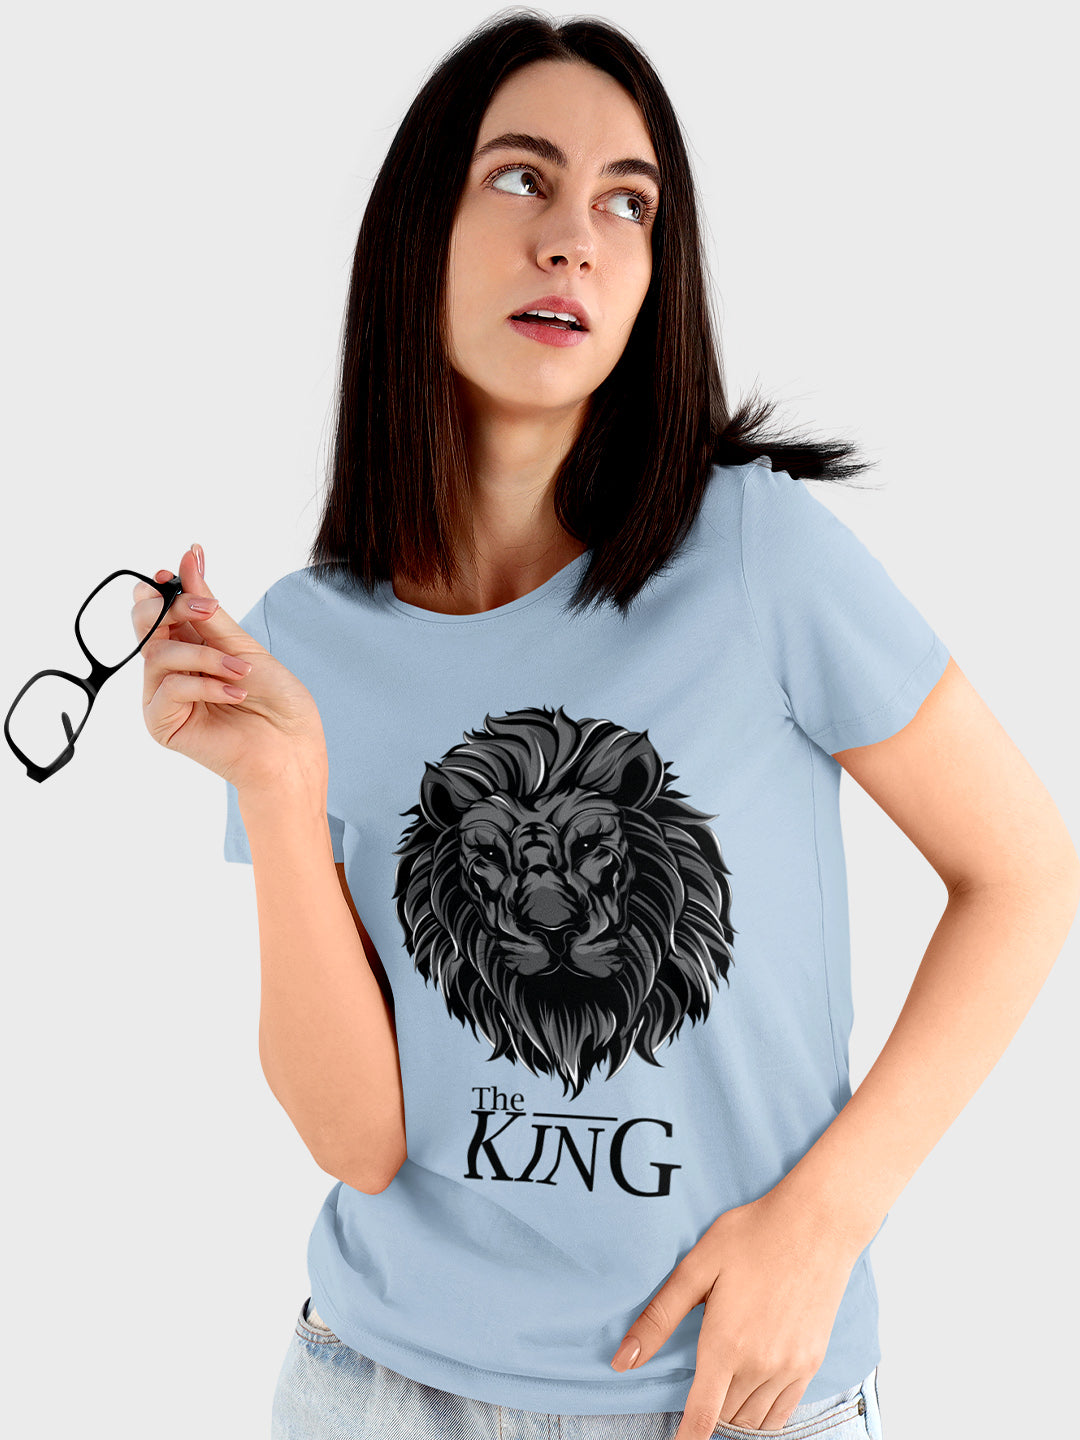 The King of the Jungle T-Shirt